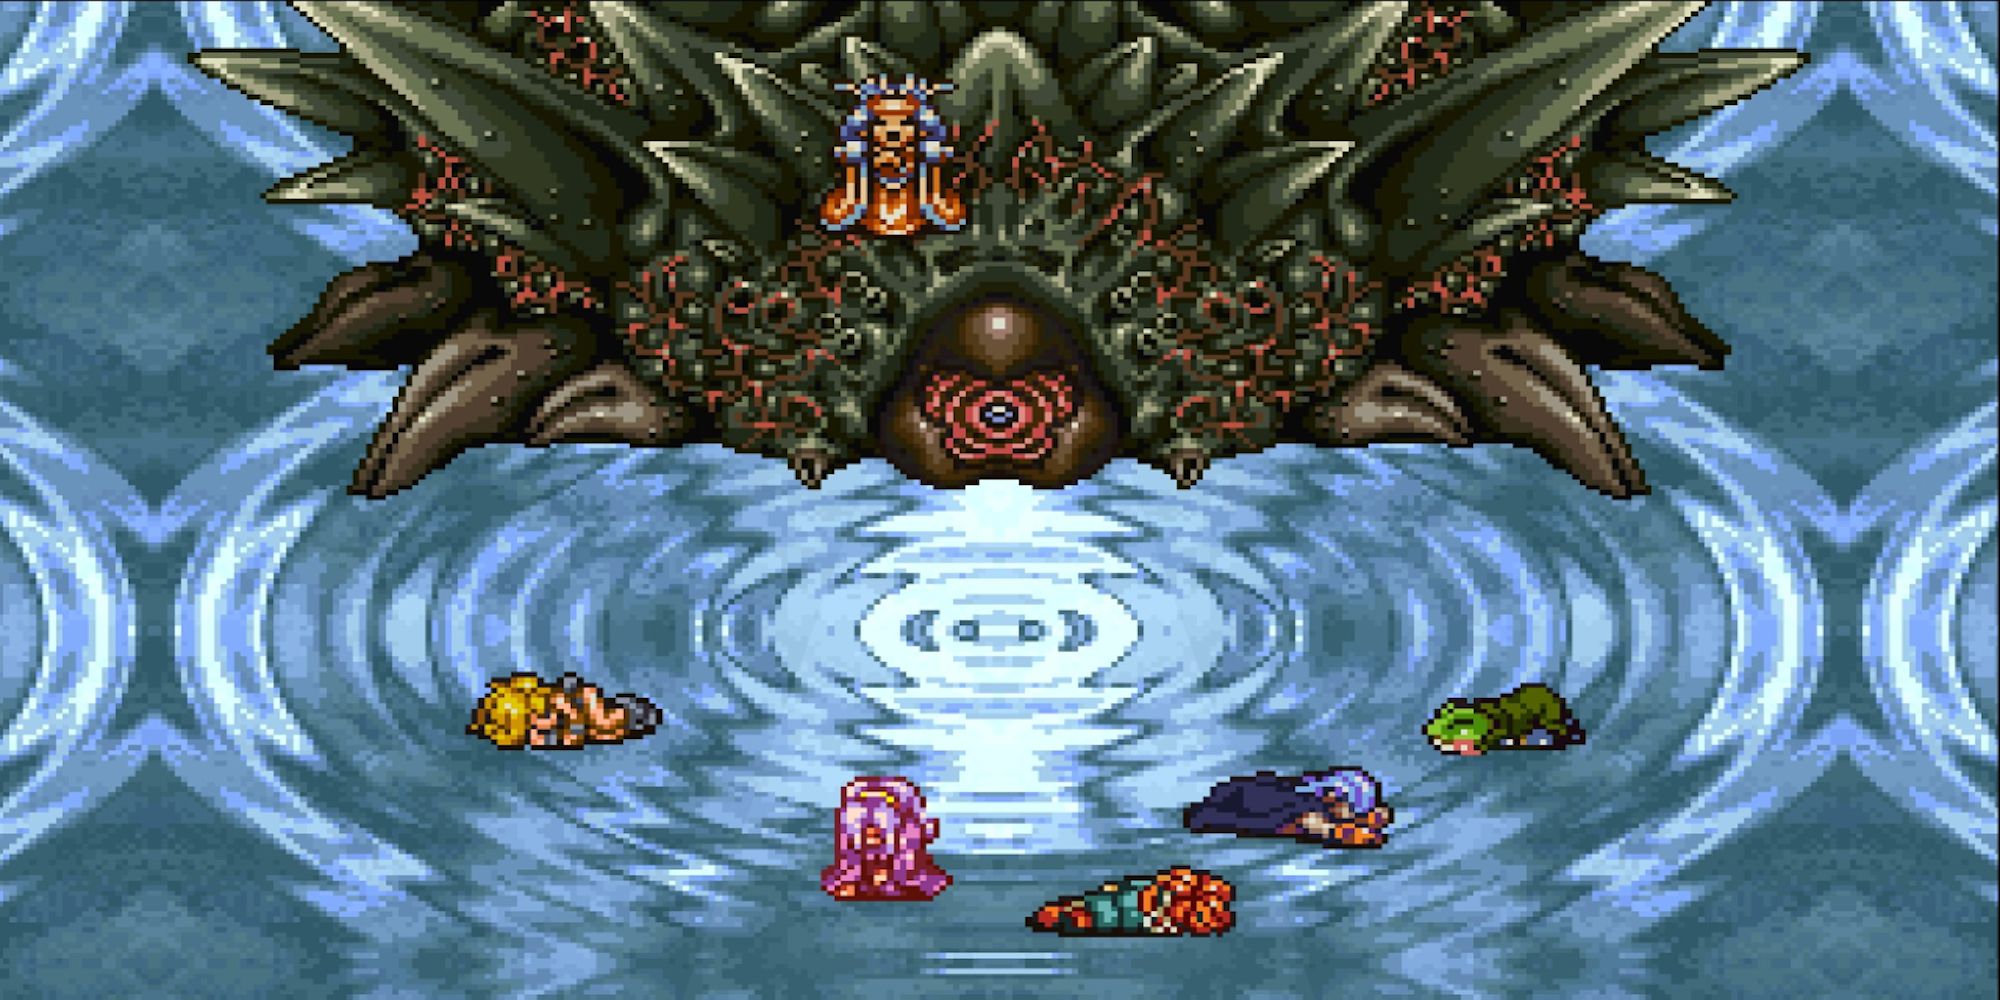 Lavos looming over the player and their defeated party (Chrono Trigger)